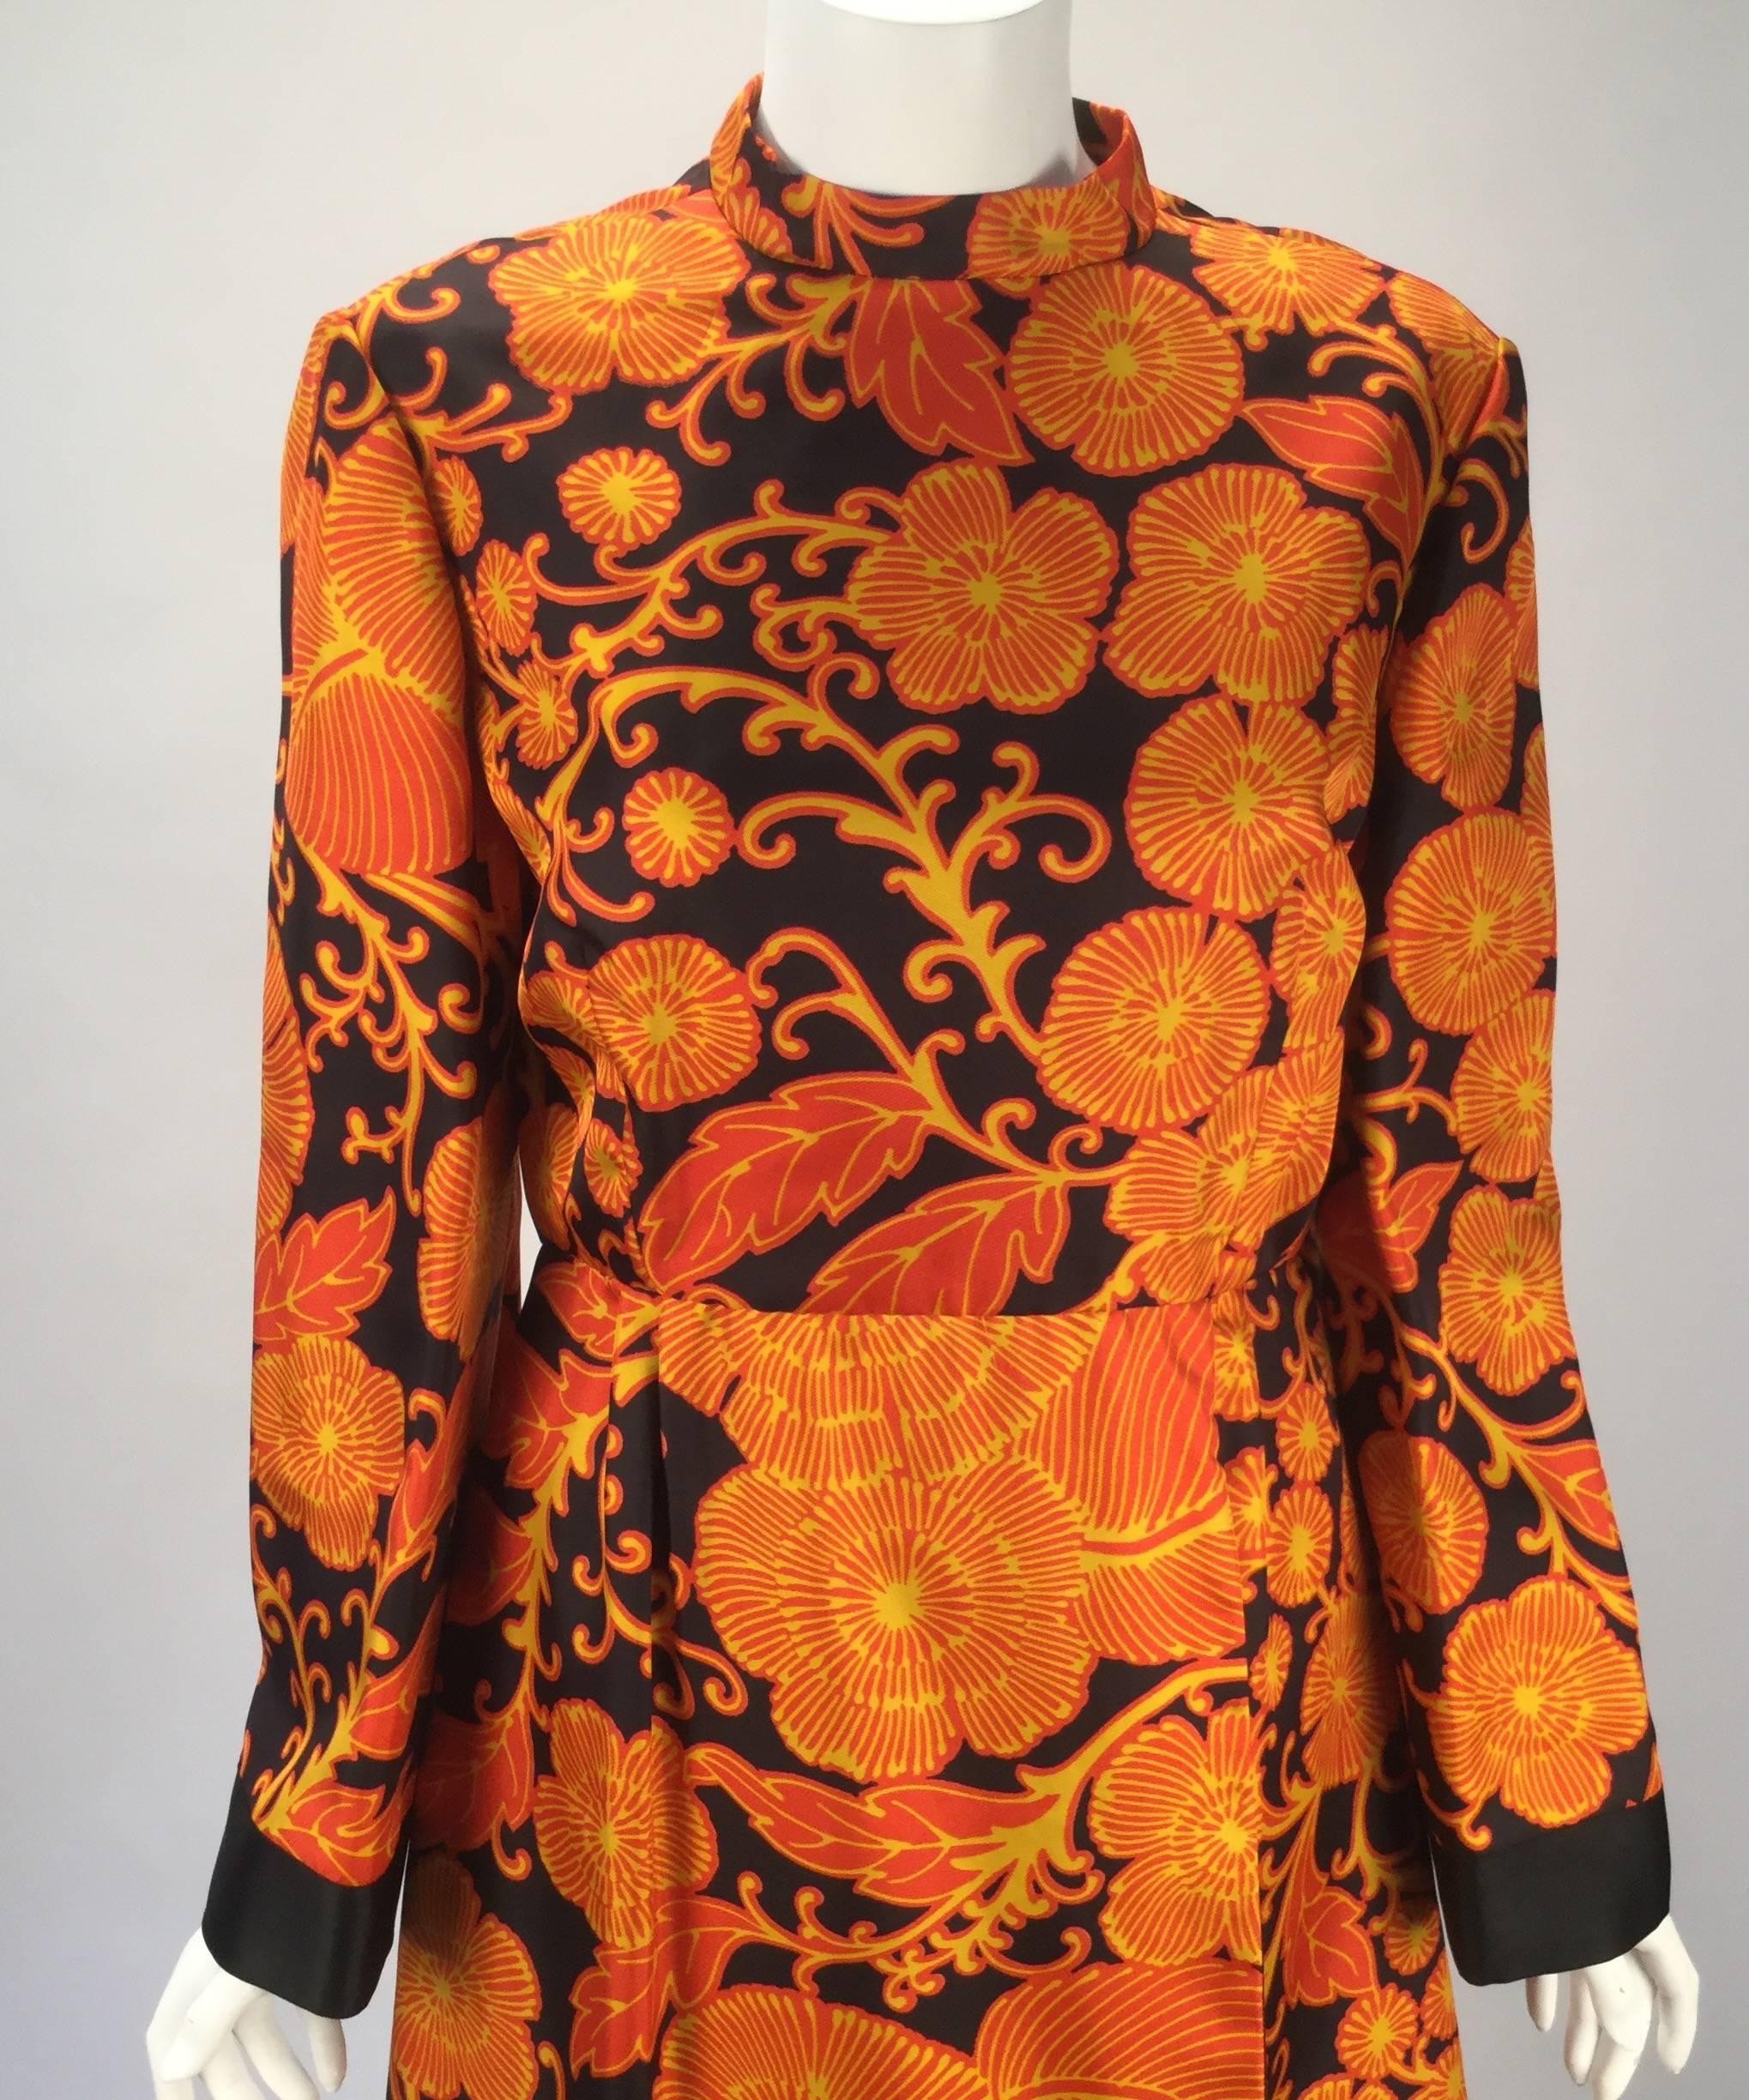 Adorable Mollie Parnis mandarin style ensemble. Tunic top has a mandarin collar and long sleeves marked with a black satin cuff. There is a zipper center back with two hook and eye closures.

The pants follow the same pattern as the top. Pants